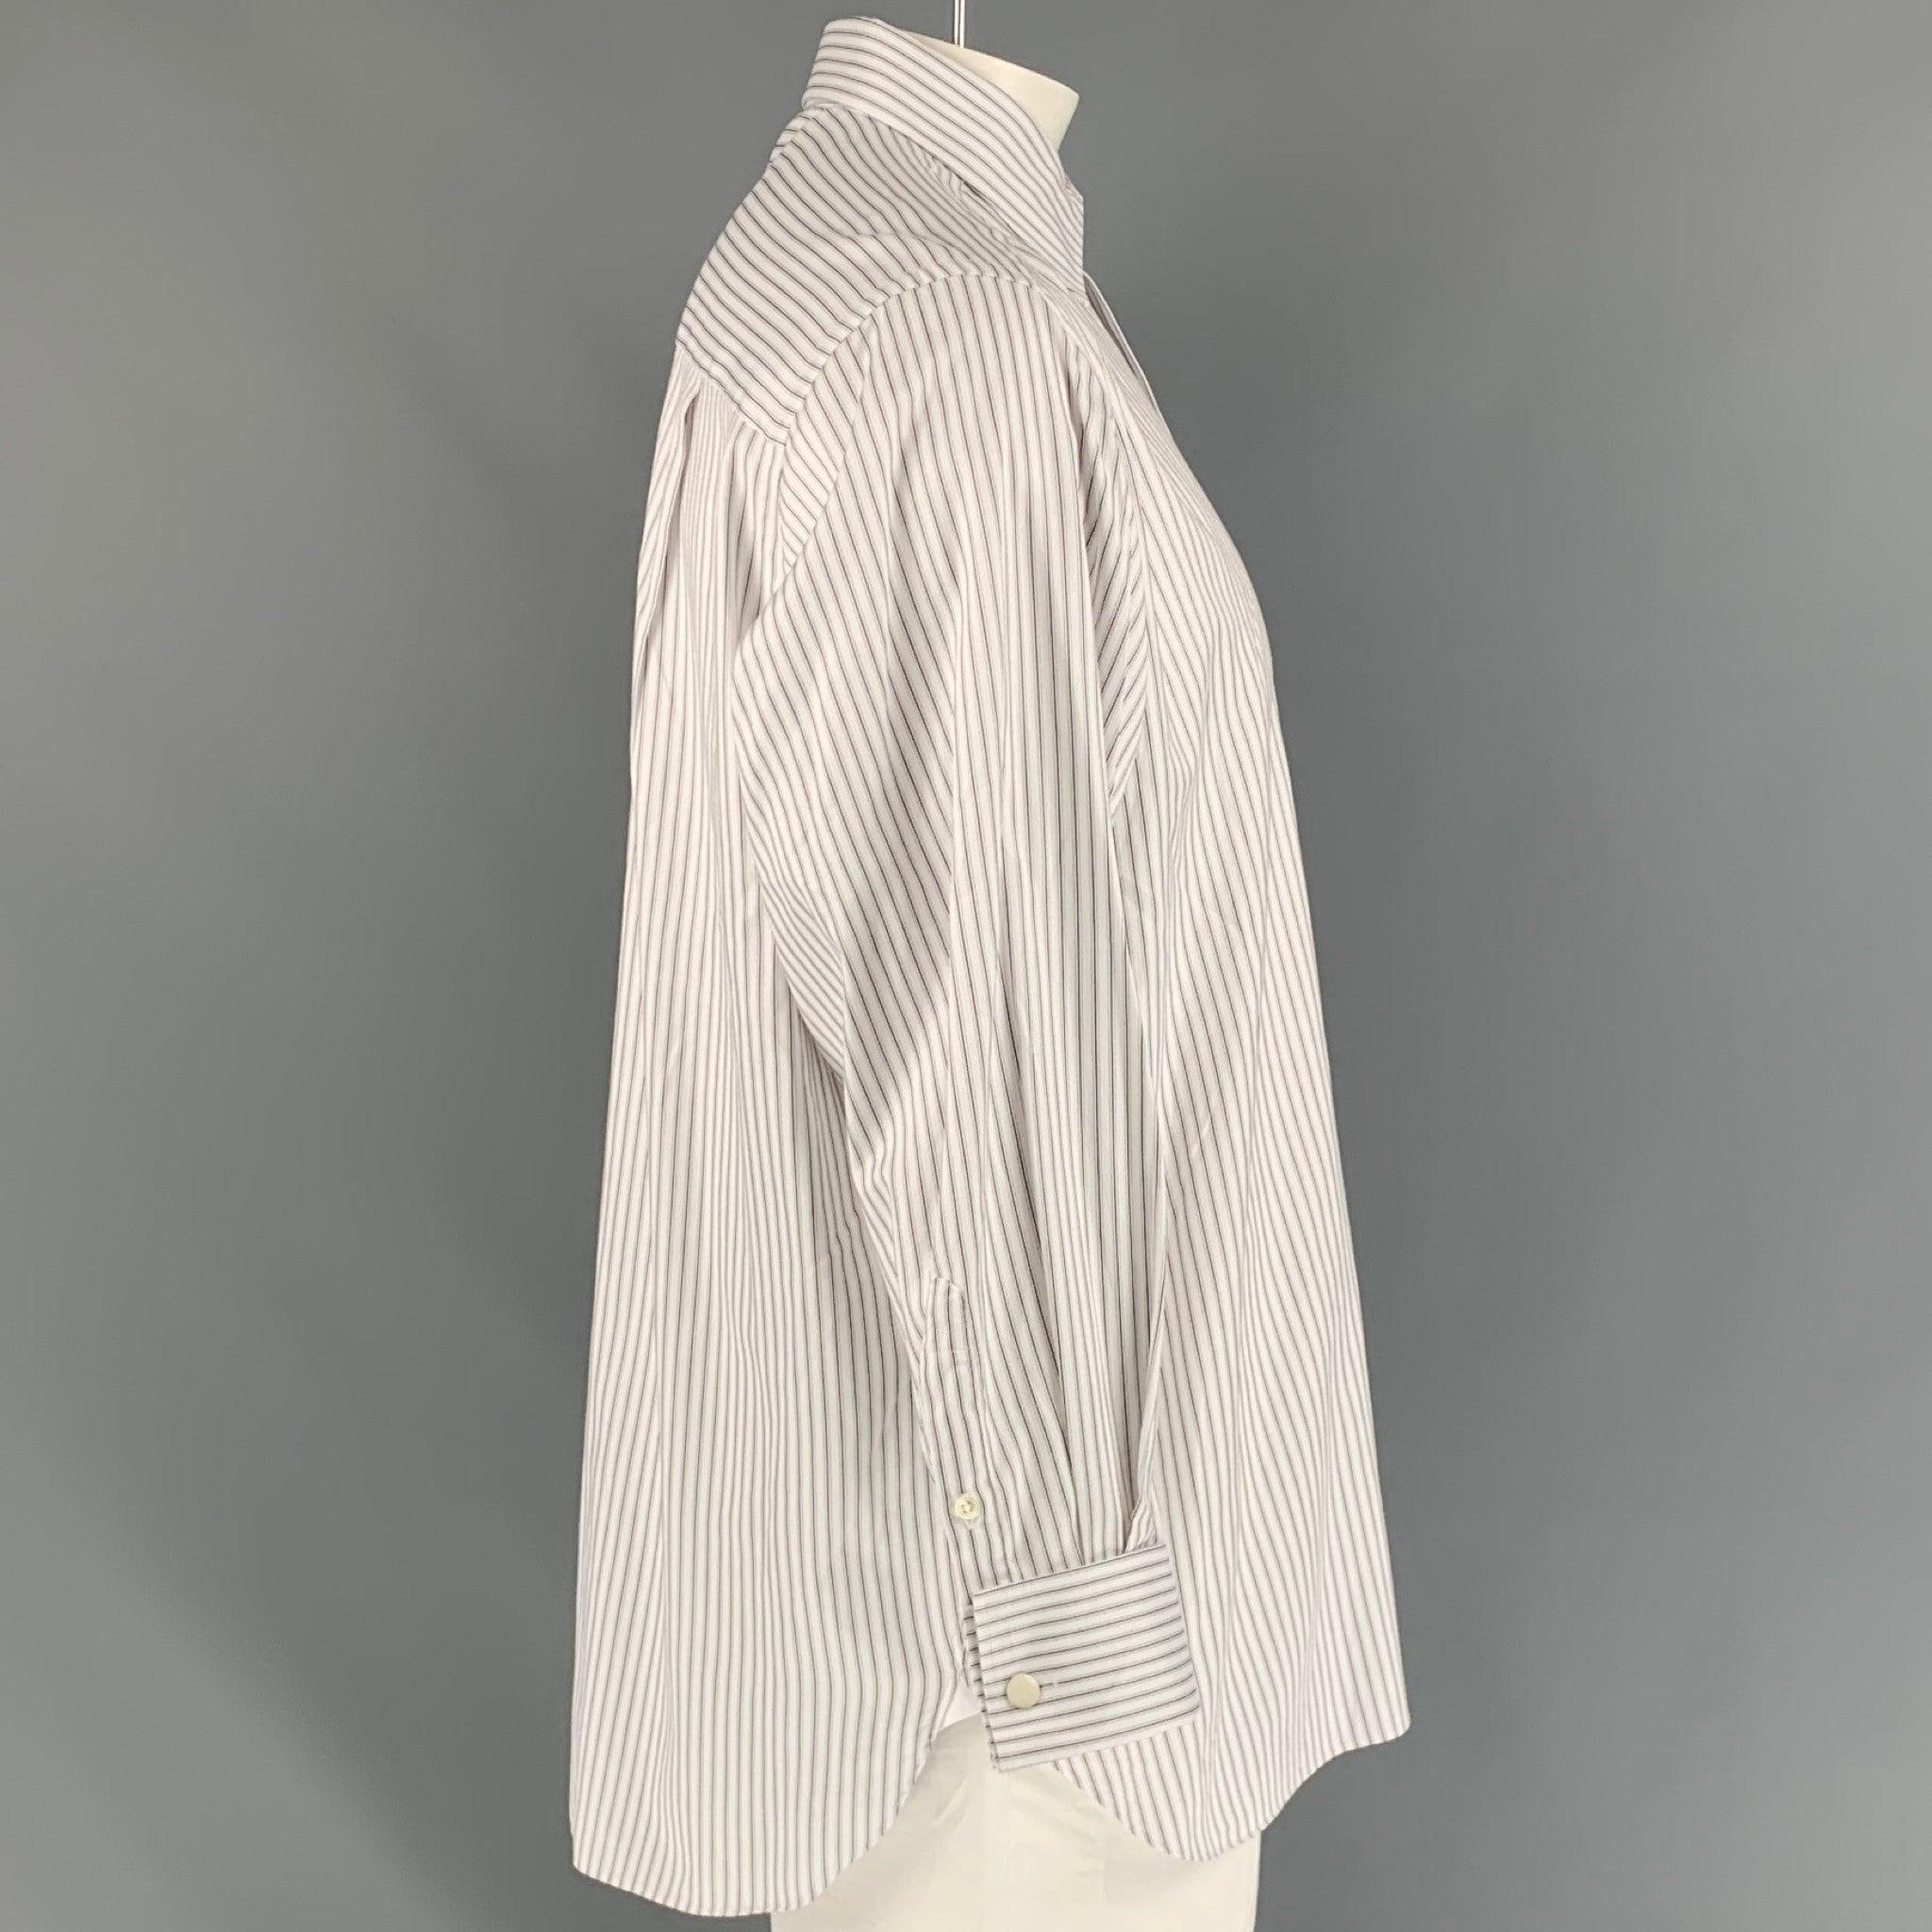 ERMENEGILDO ZEGNA 'Comfort Fit' long sleeve shirt comes in white stripped fabric featuring a patch pocket at left front panel, spread collar, french square cuff, and button up closure. Made in Spainches Very Good Pre-Owned Condition. 

Marked:   no